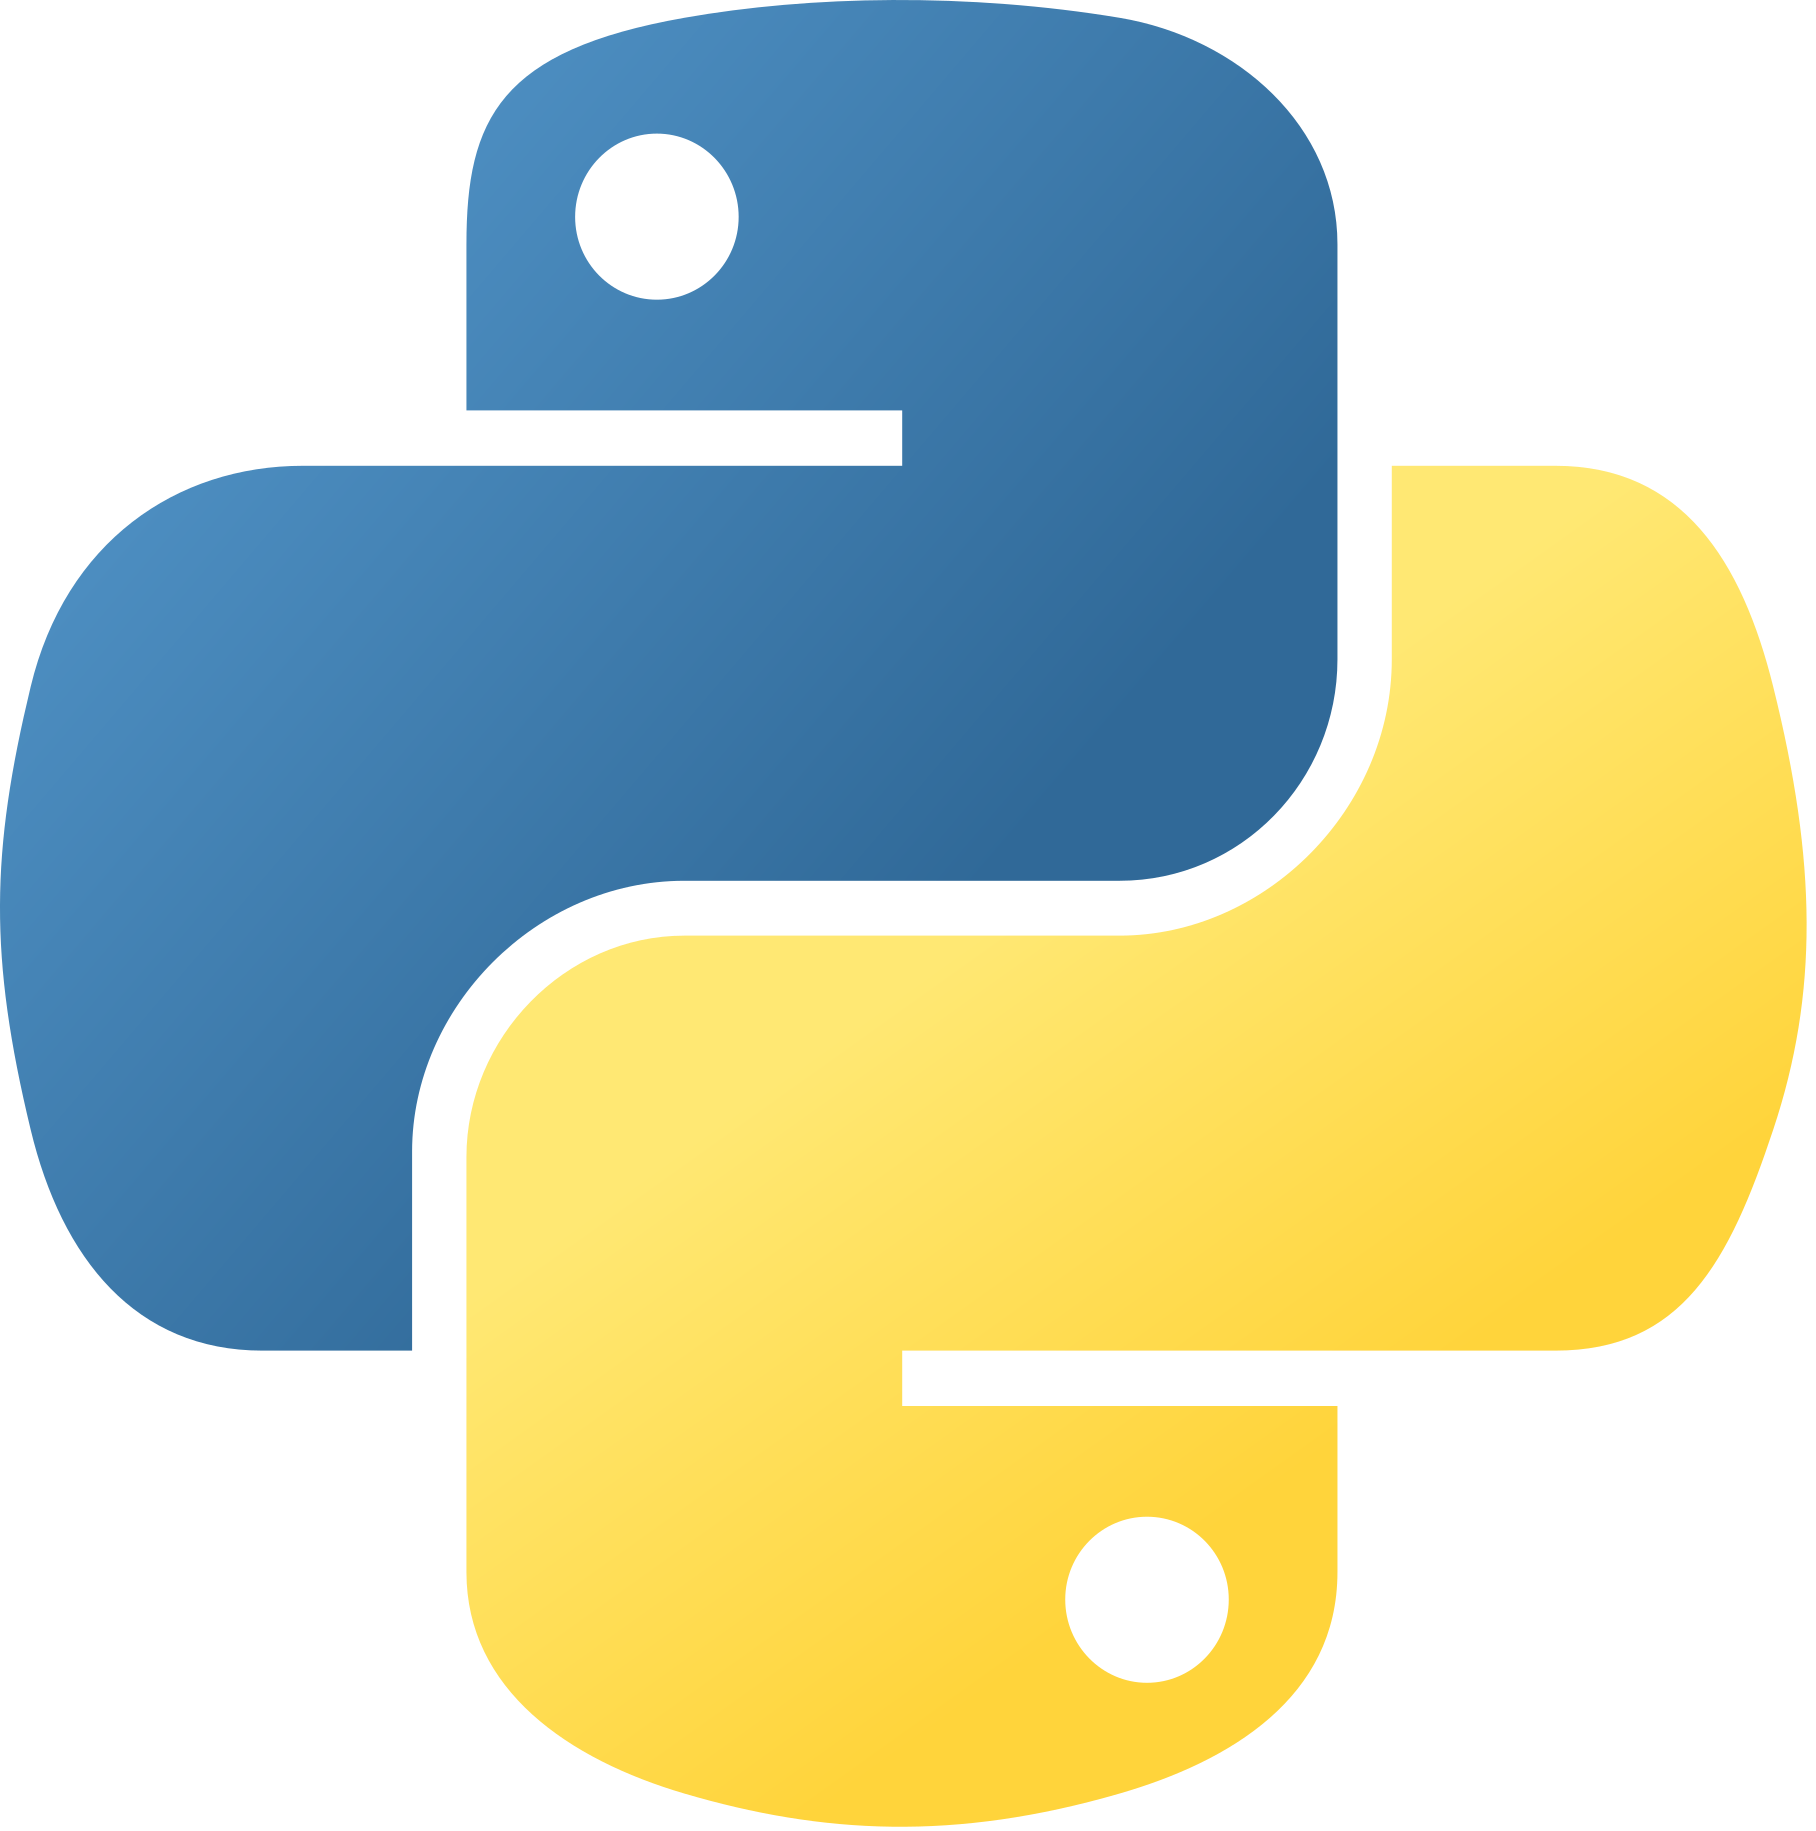 Python software applications are commonly licensed with Cryptolens.